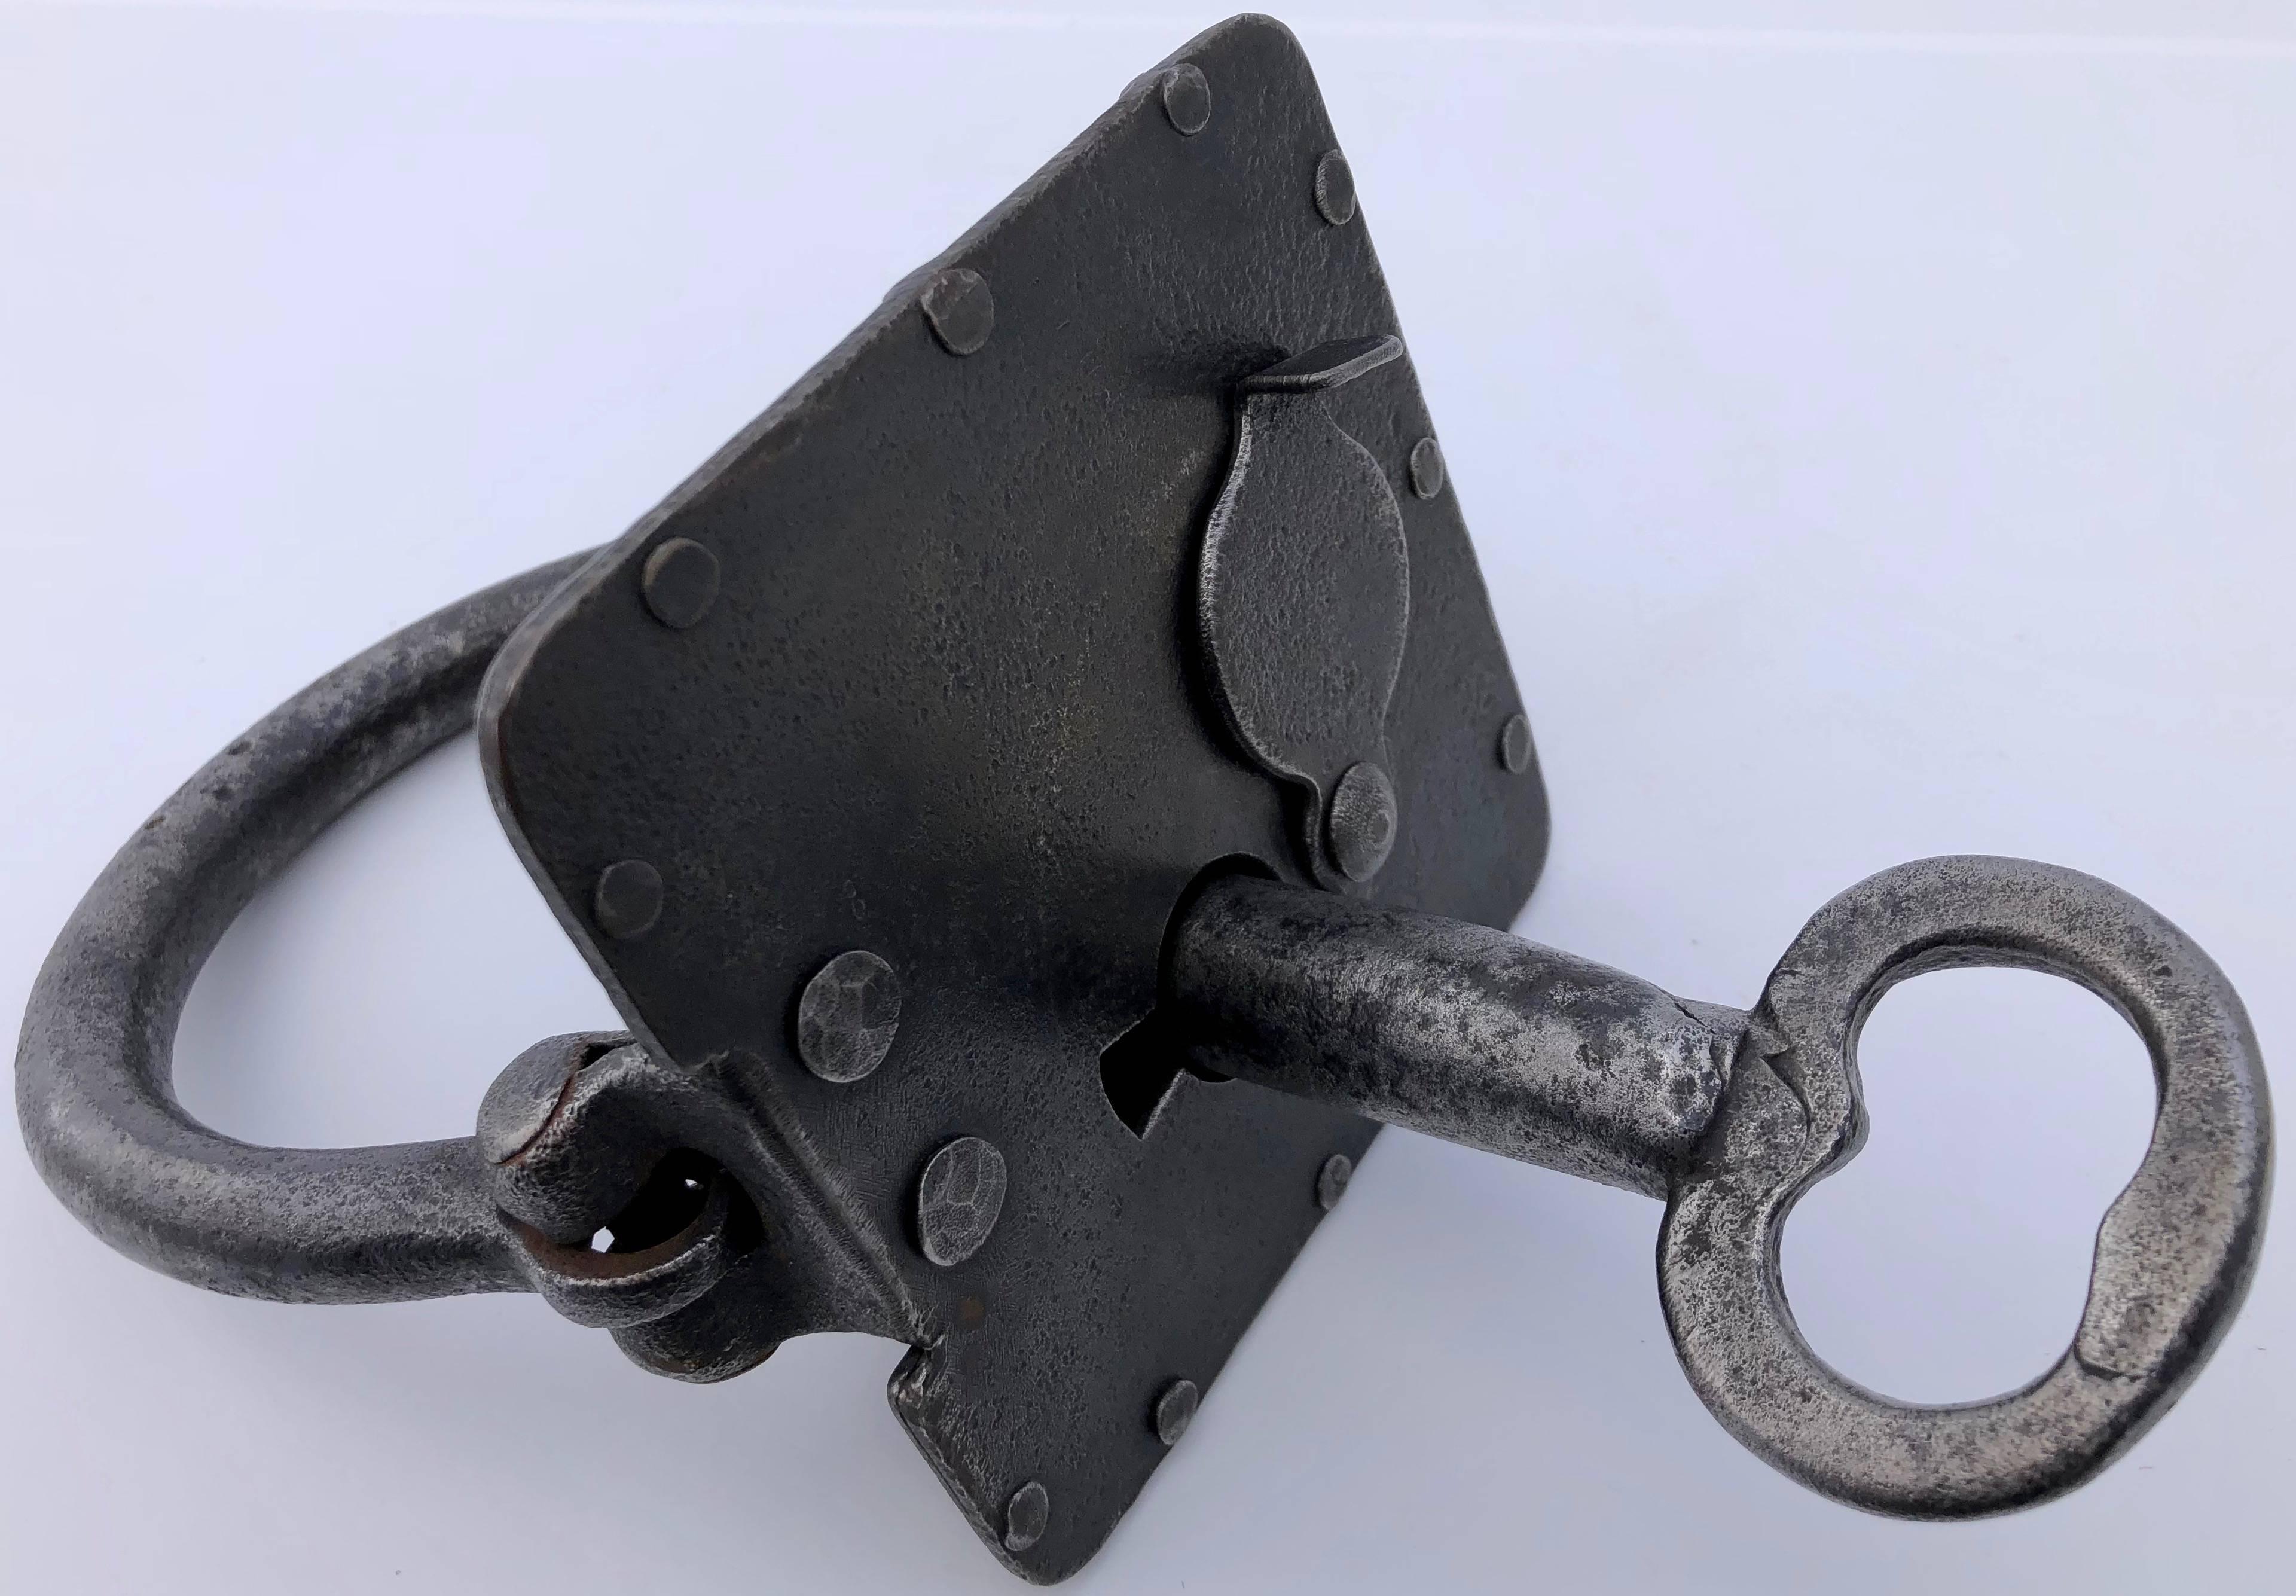 Large Forged Unusually Shaped Padlock with Covered Keyhole and Key, Early 1800s In Good Condition For Sale In Petaluma, CA